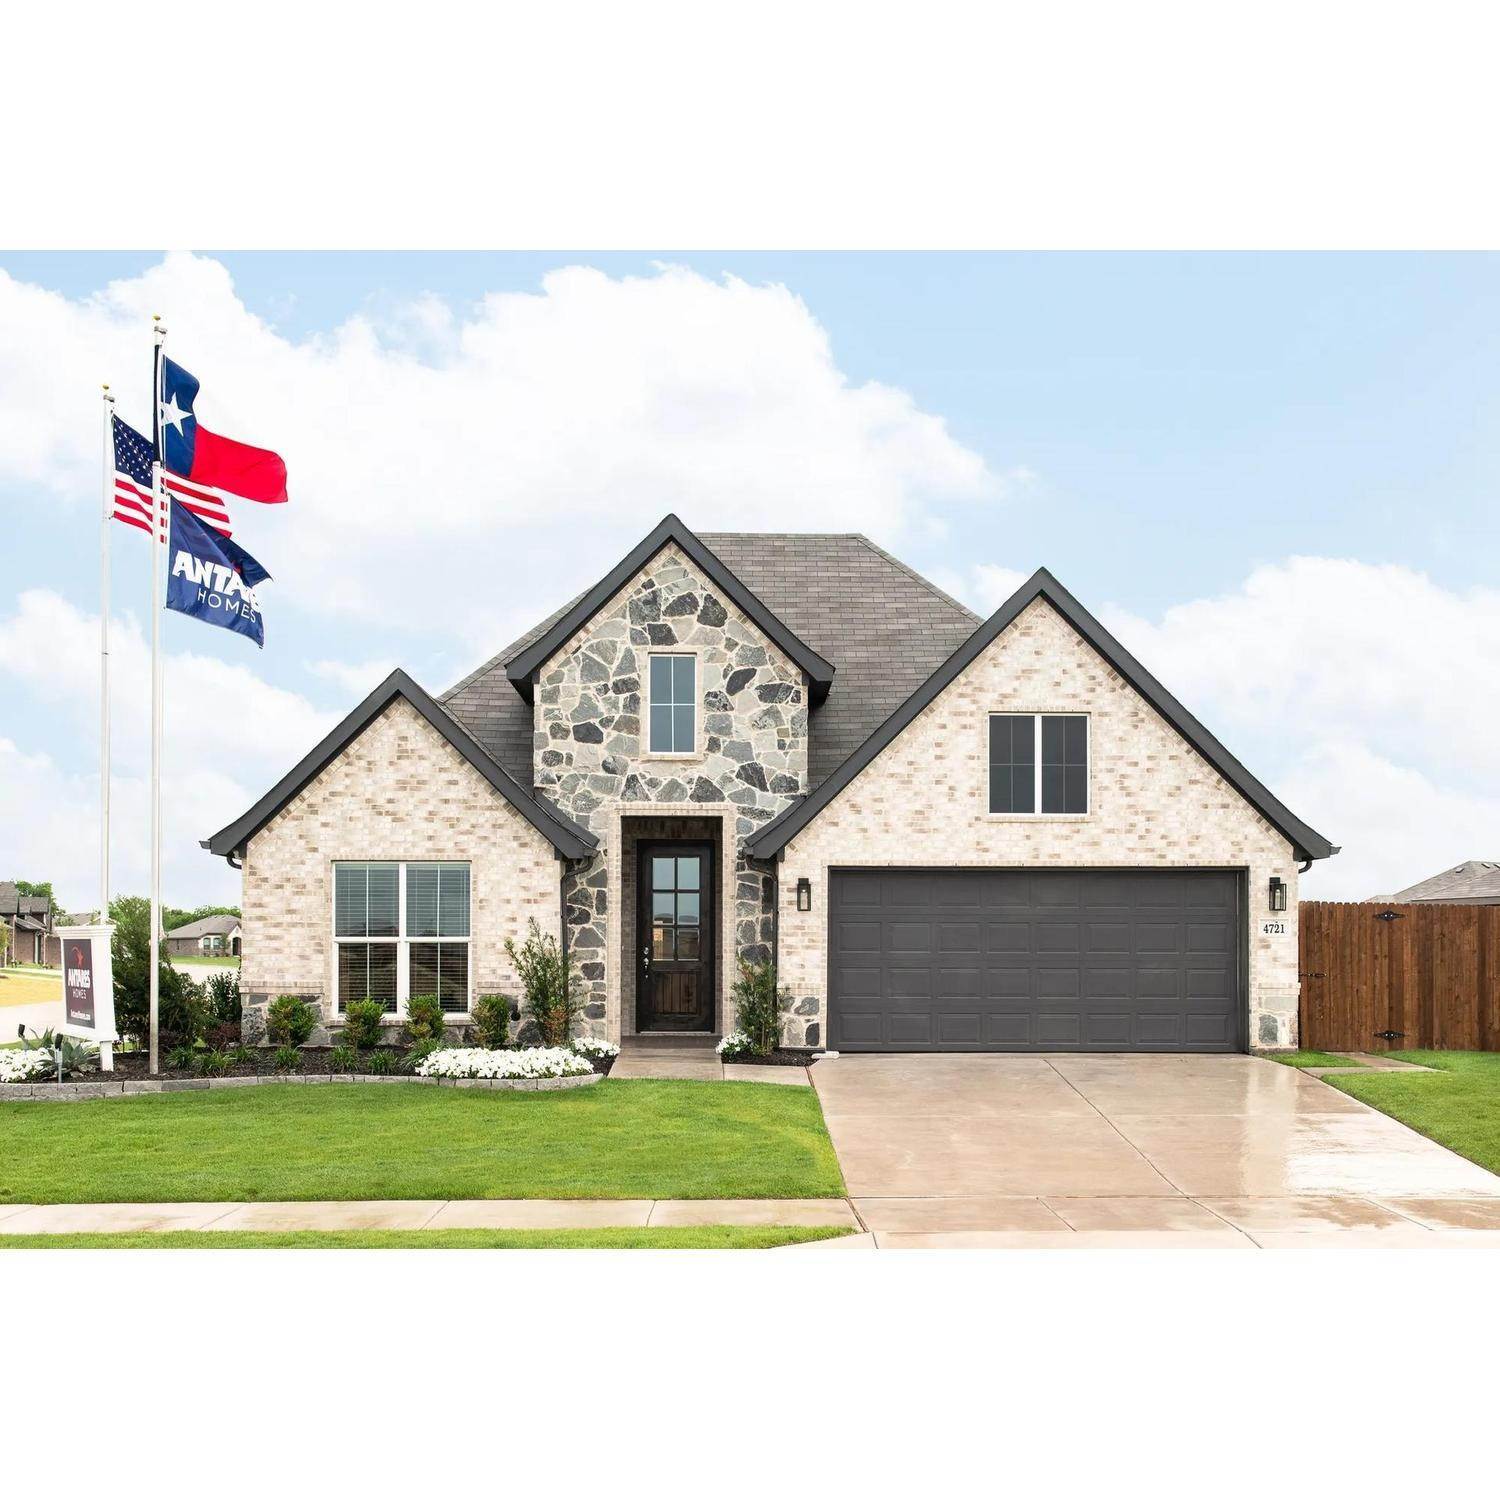 11. Woodland Springs xây dựng tại 4721 Sassafras Drive, Fort Worth, TX 76036